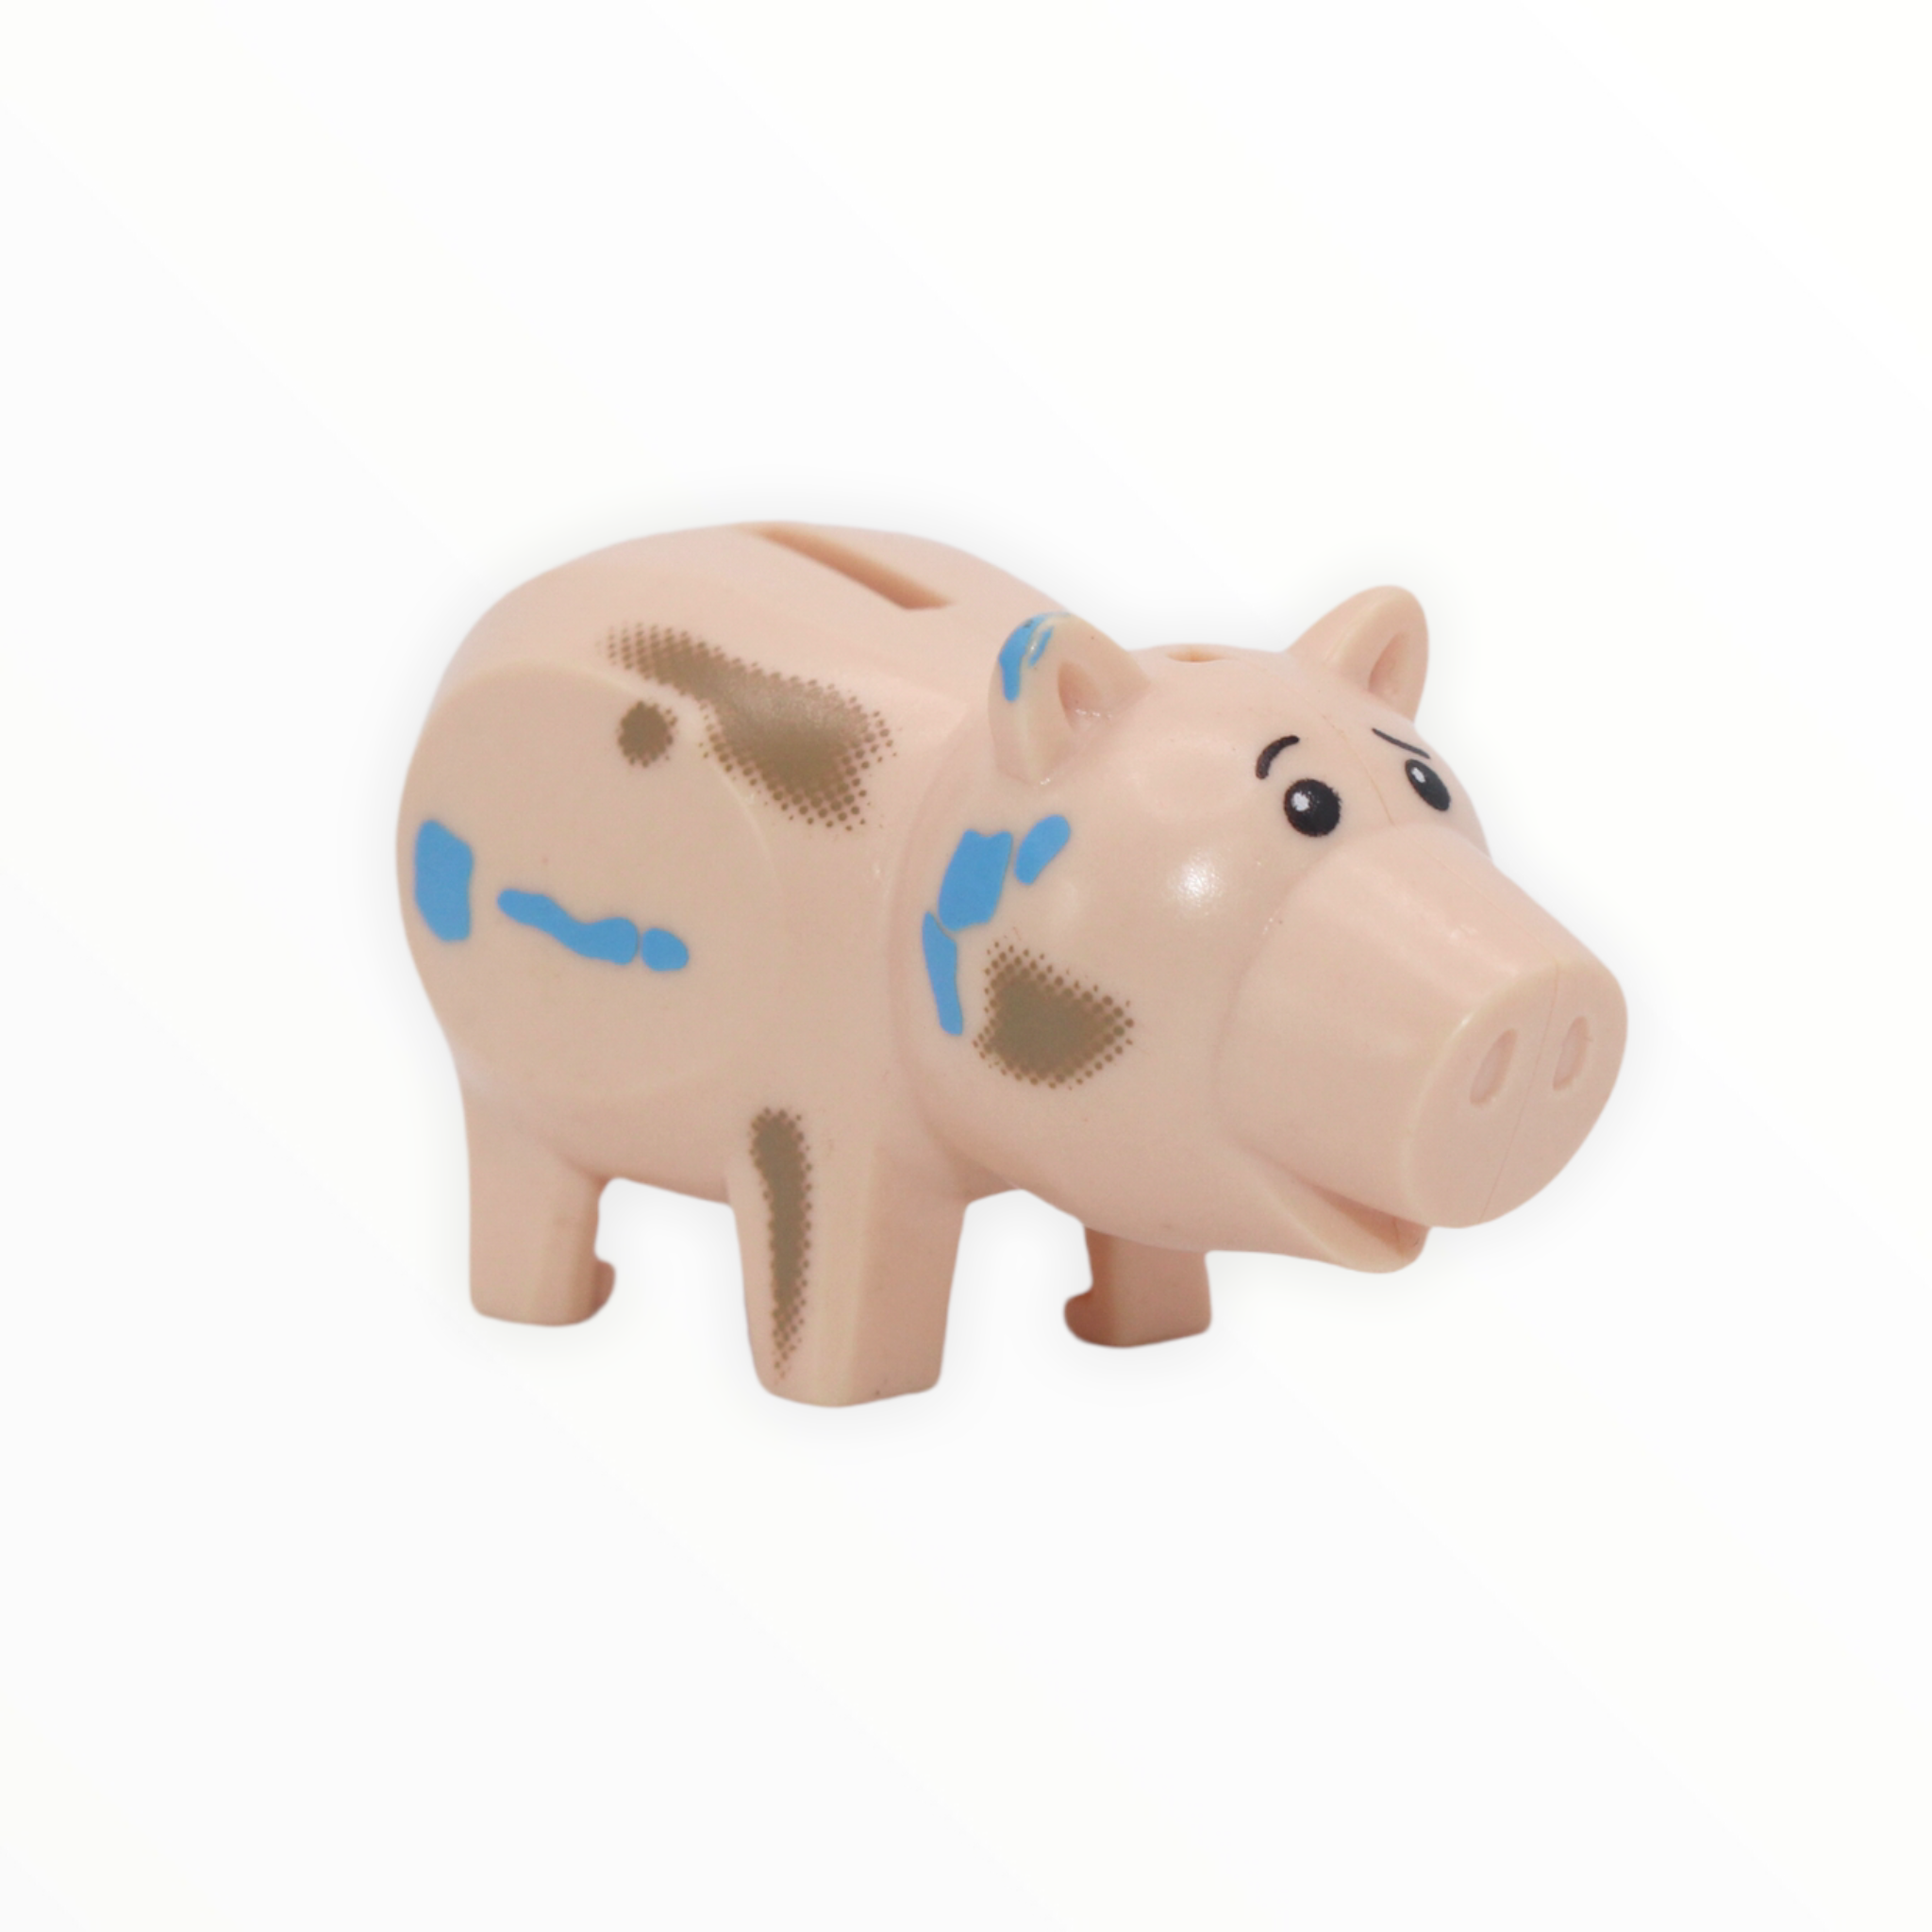 Hamm (Toy Story 3, dirty, no coin plug)